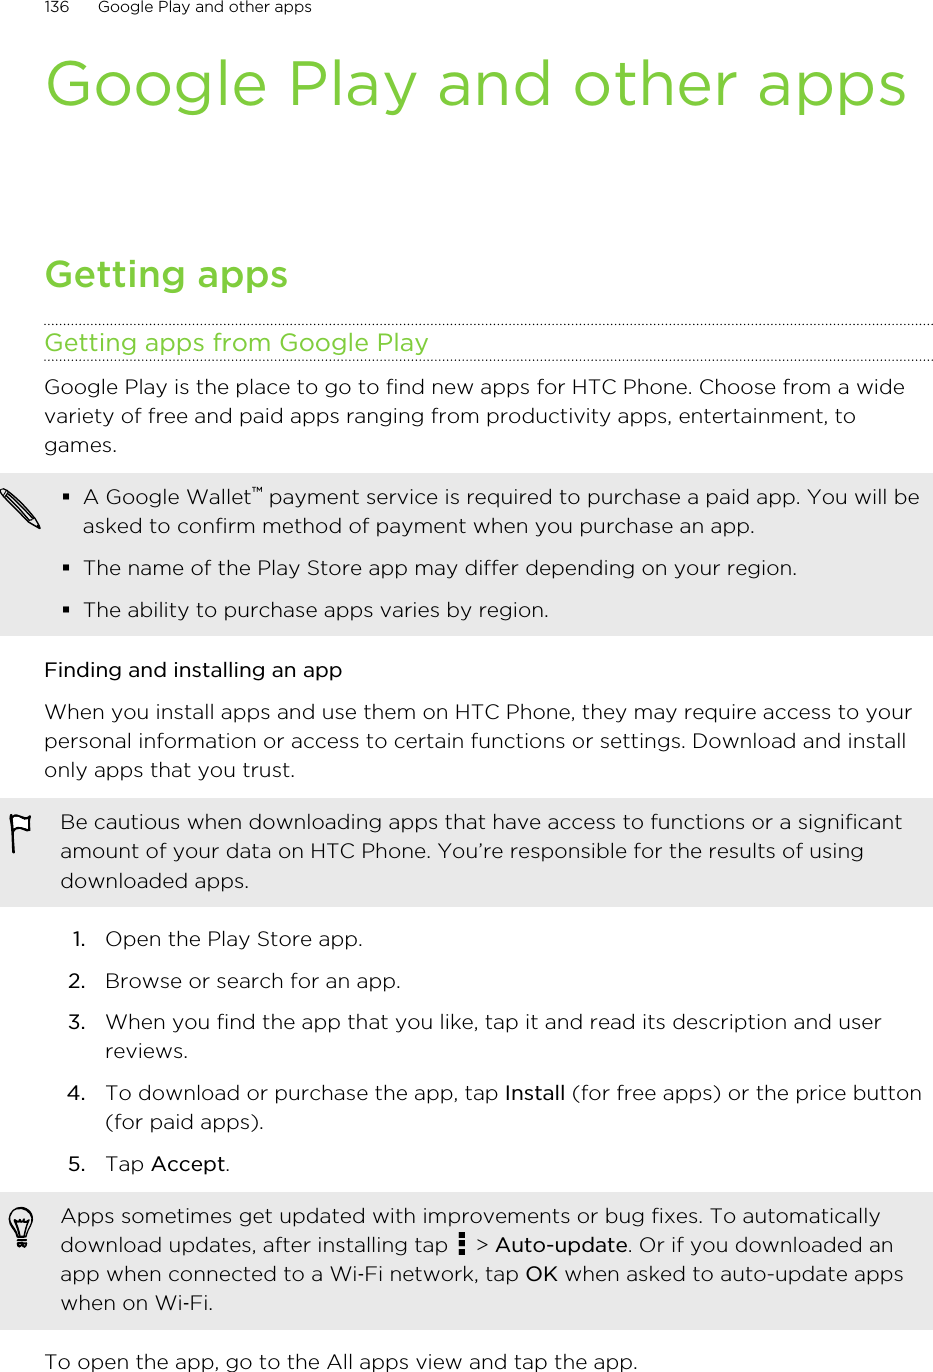 Google Play and other appsGetting appsGetting apps from Google PlayGoogle Play is the place to go to find new apps for HTC Phone. Choose from a widevariety of free and paid apps ranging from productivity apps, entertainment, togames.§A Google Wallet™ payment service is required to purchase a paid app. You will beasked to confirm method of payment when you purchase an app.§The name of the Play Store app may differ depending on your region.§The ability to purchase apps varies by region.Finding and installing an appWhen you install apps and use them on HTC Phone, they may require access to yourpersonal information or access to certain functions or settings. Download and installonly apps that you trust.Be cautious when downloading apps that have access to functions or a significantamount of your data on HTC Phone. You’re responsible for the results of usingdownloaded apps.1. Open the Play Store app.2. Browse or search for an app.3. When you find the app that you like, tap it and read its description and userreviews.4. To download or purchase the app, tap Install (for free apps) or the price button(for paid apps).5. Tap Accept. Apps sometimes get updated with improvements or bug fixes. To automaticallydownload updates, after installing tap   &gt; Auto-update. Or if you downloaded anapp when connected to a Wi‑Fi network, tap OK when asked to auto-update appswhen on Wi‑Fi.To open the app, go to the All apps view and tap the app.136 Google Play and other appsHTC Confidential for Certification HTC Confidential for Certification 